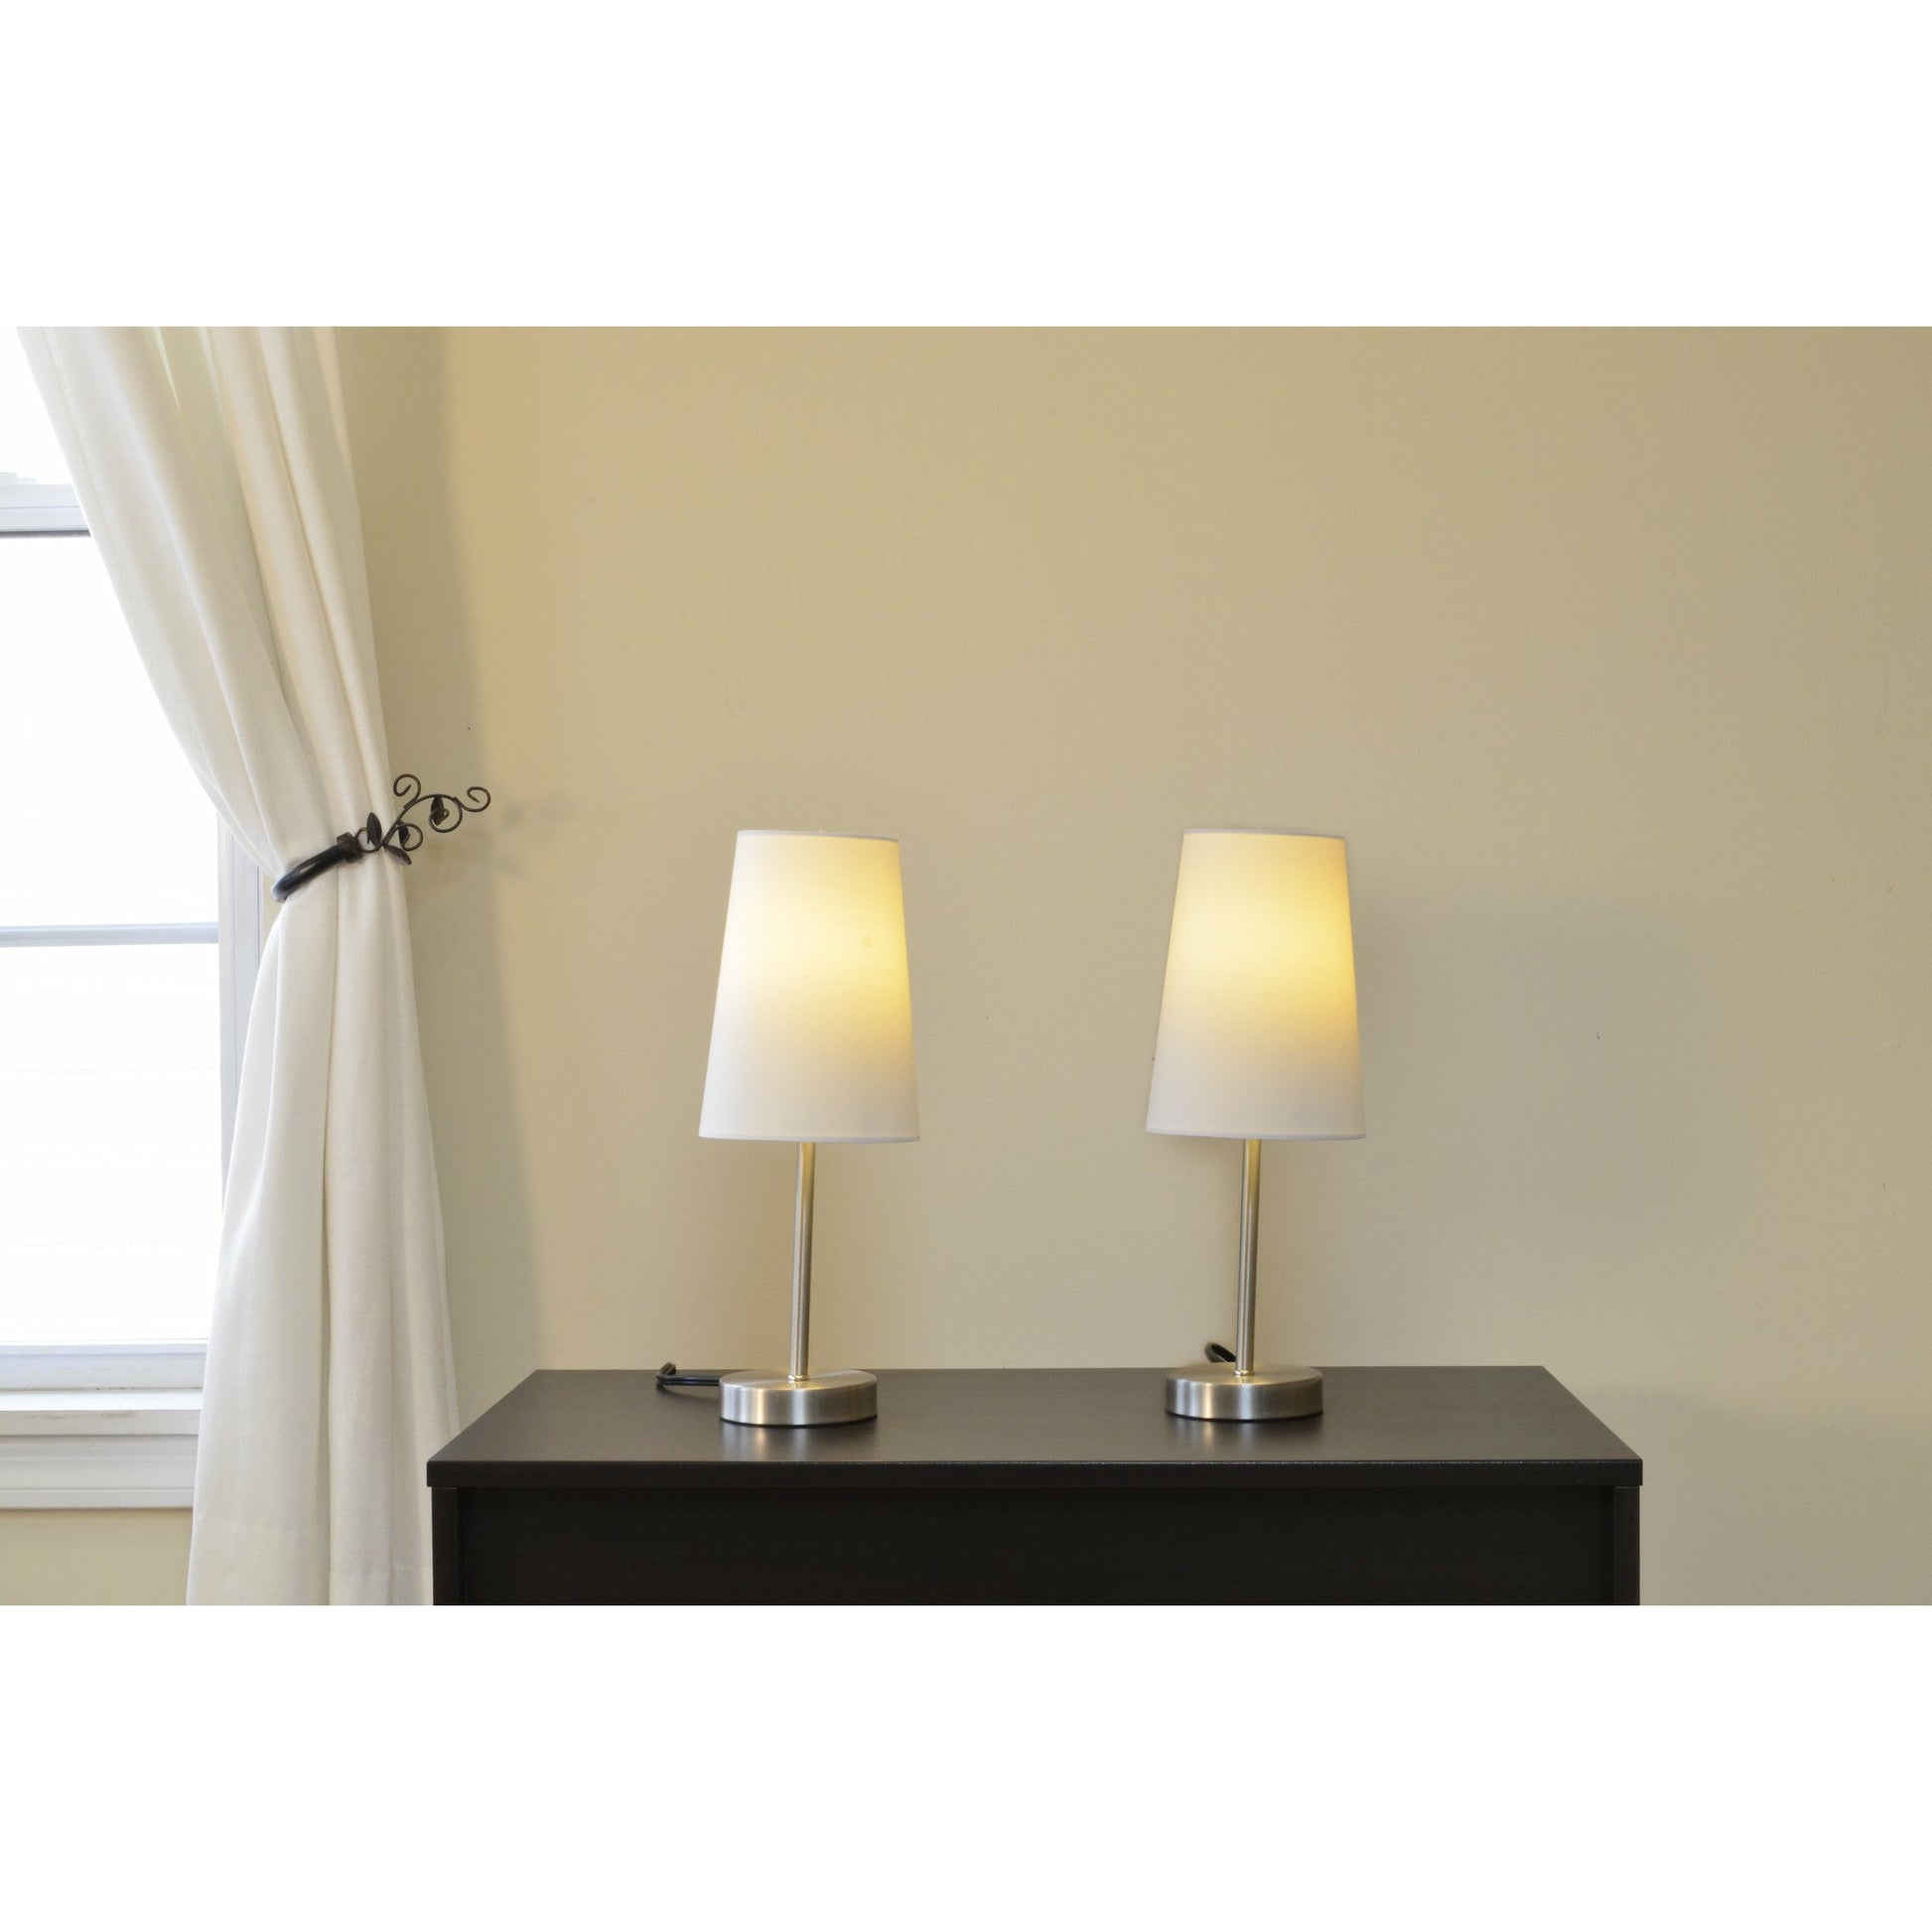 LightAccents Brushed Nickel Table Lamp with Fabric Shade - LightAccents.com
 - 8